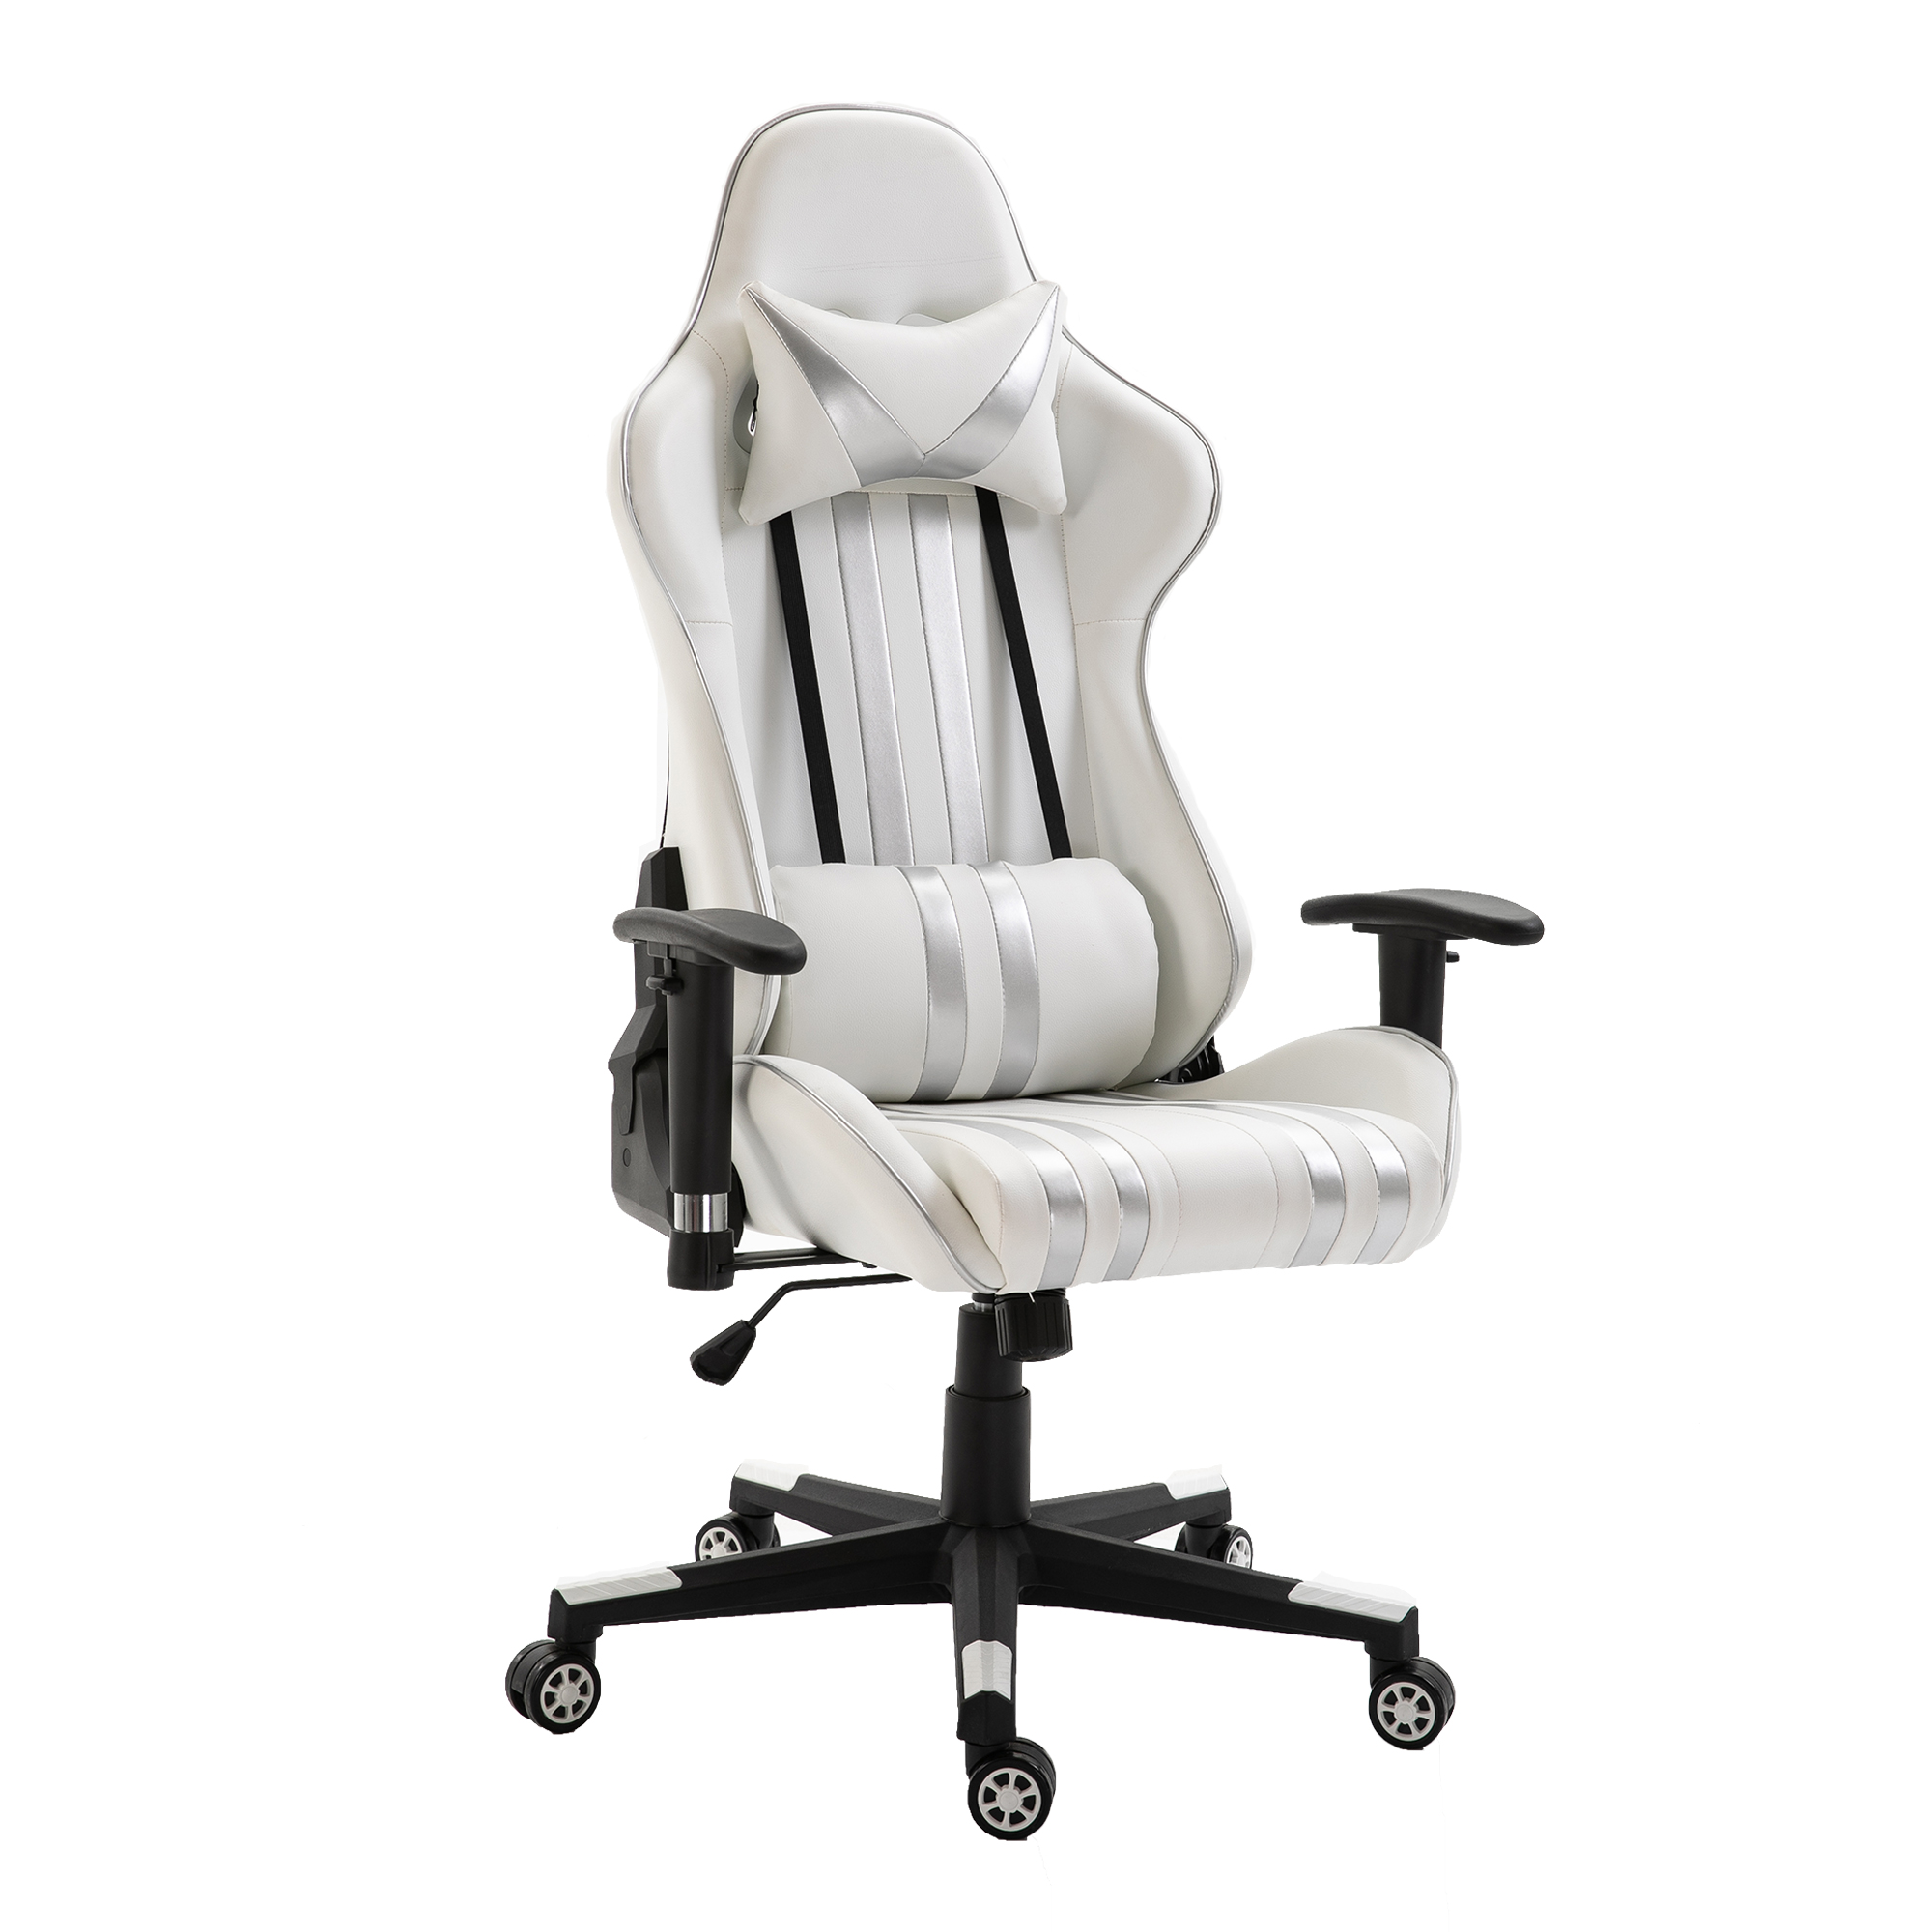 https://www.jifangfurniture.com/customized-good-quality-roating-and-comfortable-ergonomic-backrest-gaming-chair-product/